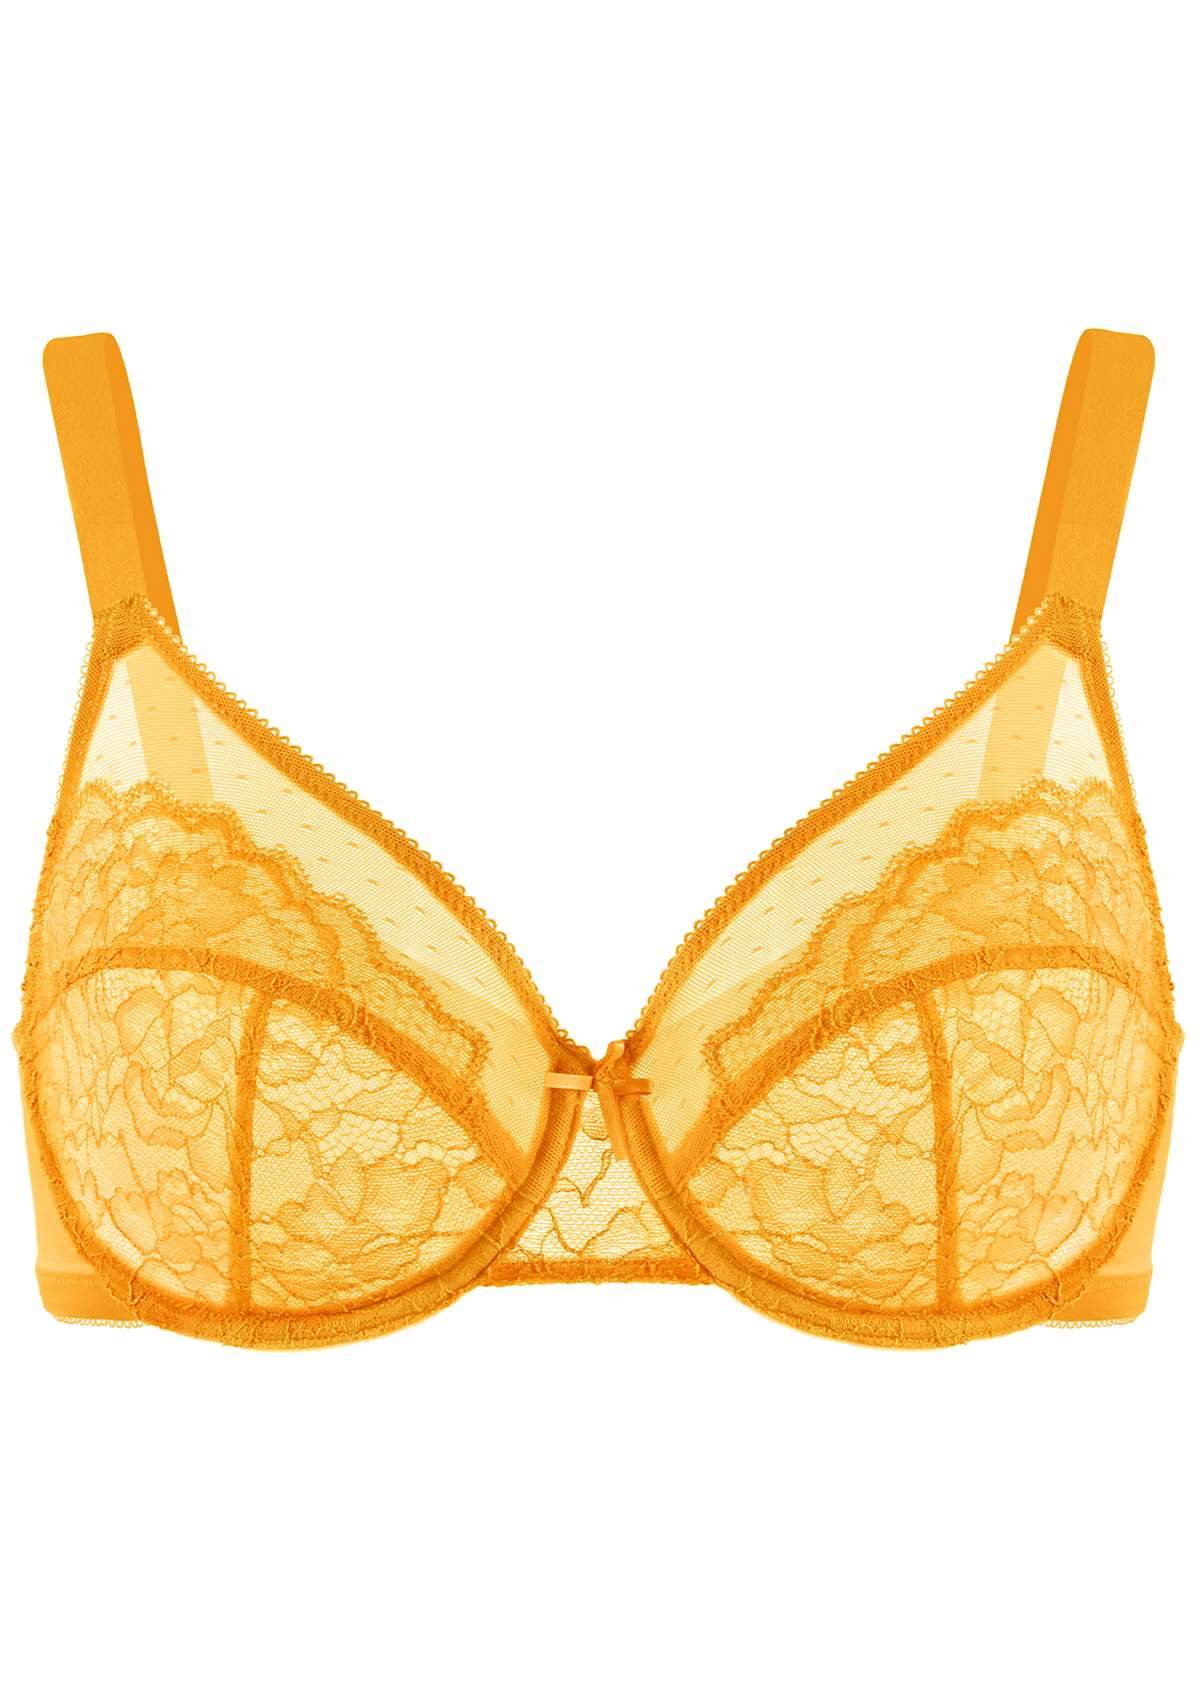 HSIA Enchante Bra And Panty Sets: Unpadded Bra With Back Support - Cadmium Yellow / 36 / G